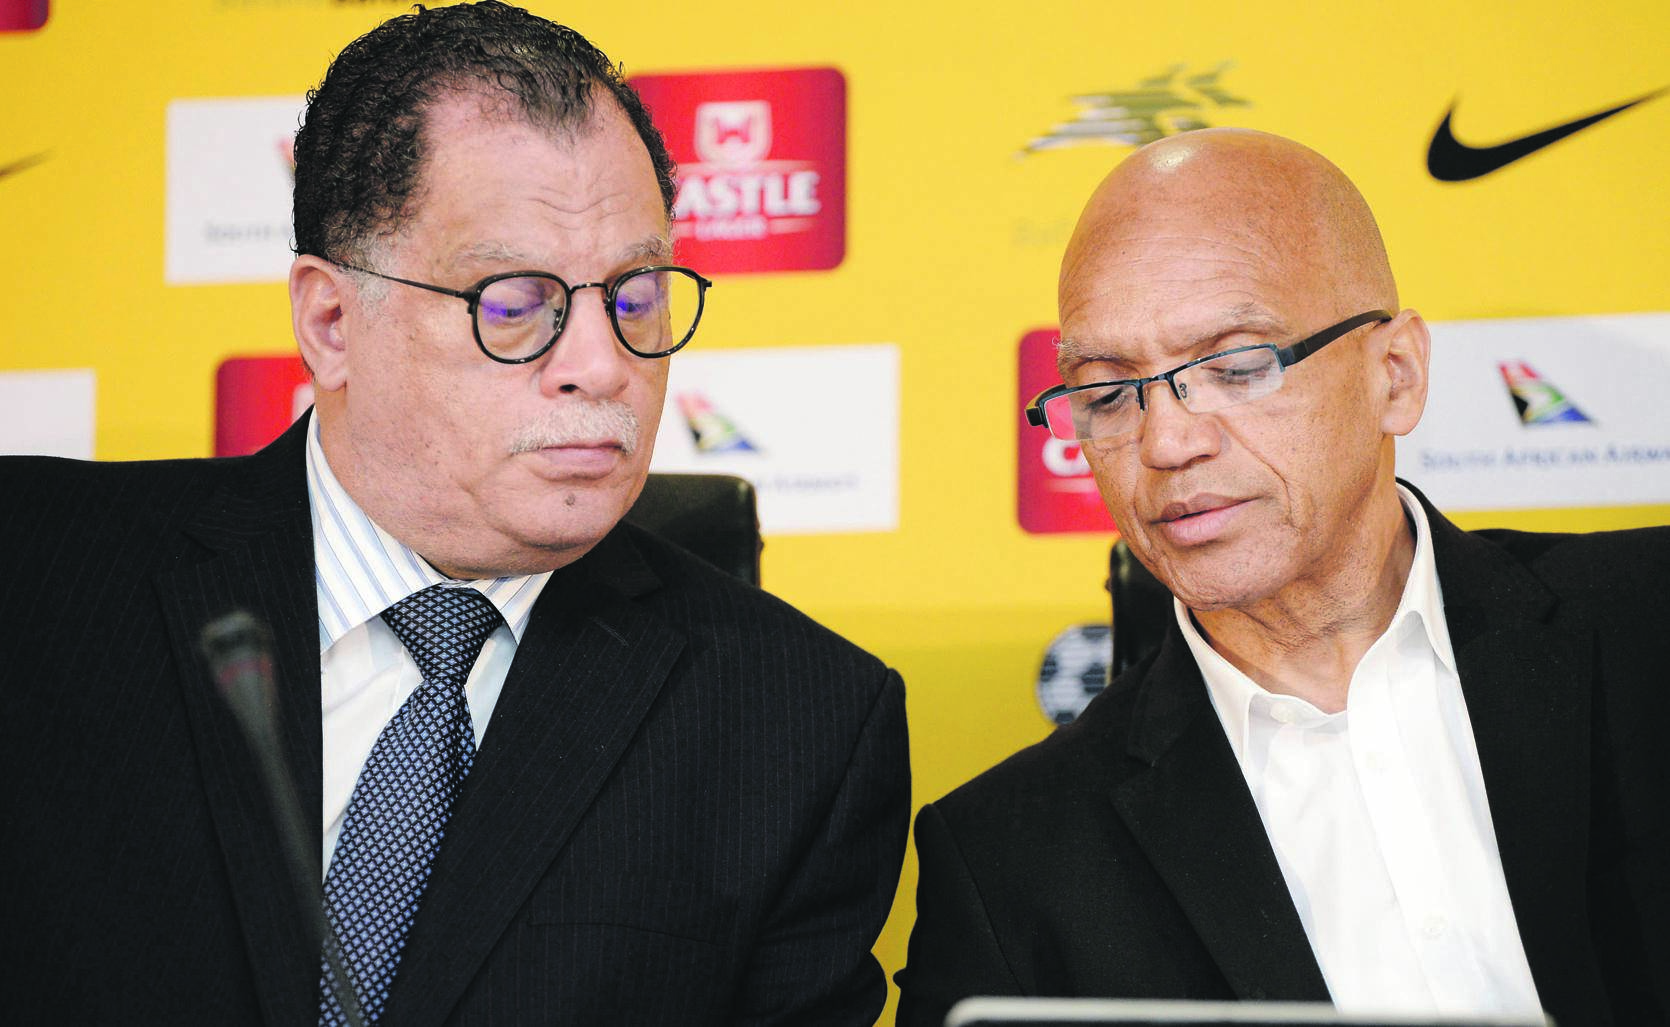 Former Safa chief executive Dennis Mumble has accused the association’s president Danny Jordaan of flouting Safa’s constitution. Picture: Lee Warren / Gallo Images